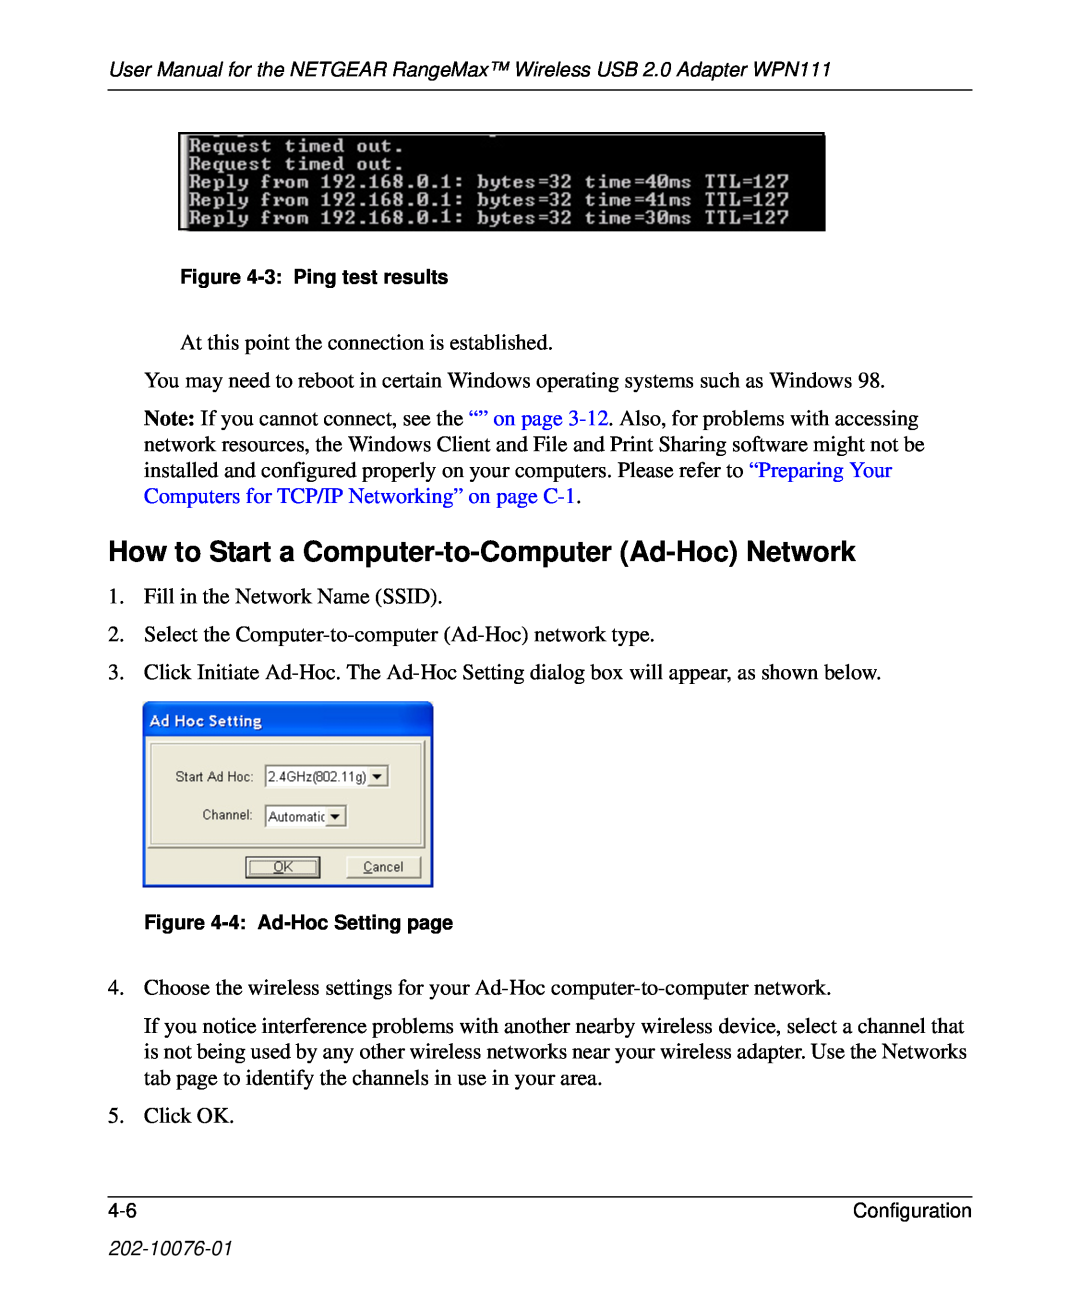 NETGEAR WPN111 user manual How to Start a Computer-to-Computer Ad-Hoc Network 